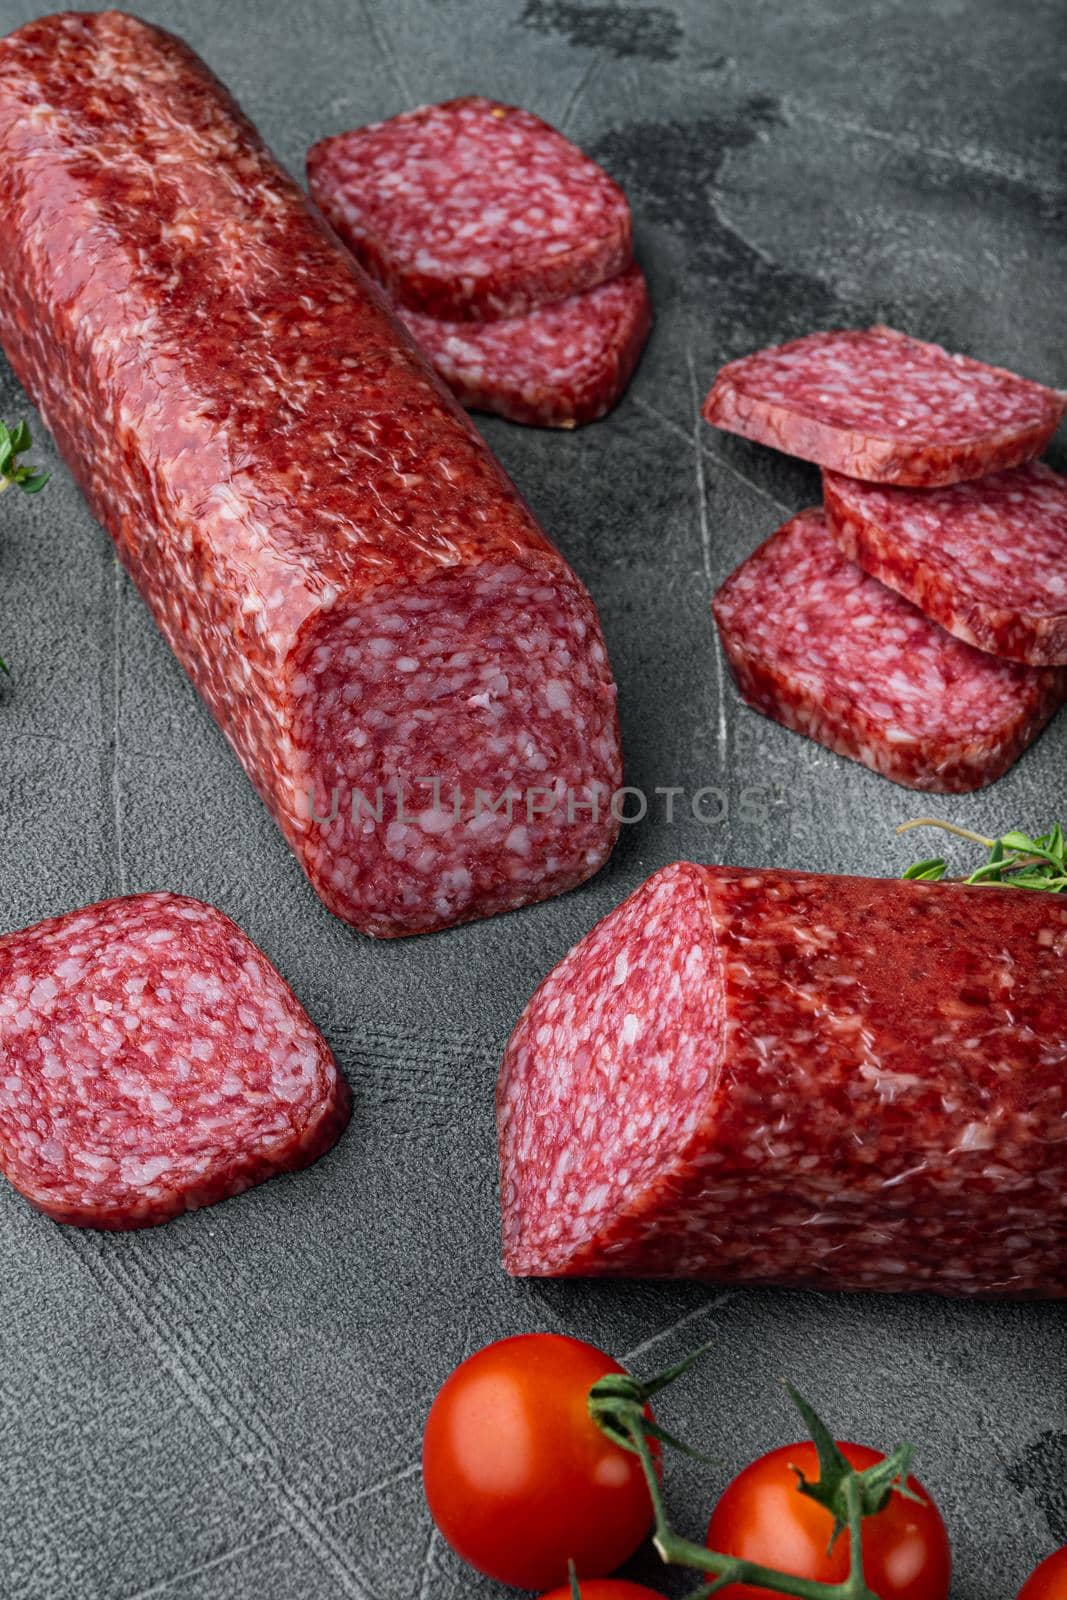 Dry salami sausage with fresh rosemary and spices, on gray stone table background by Ilianesolenyi